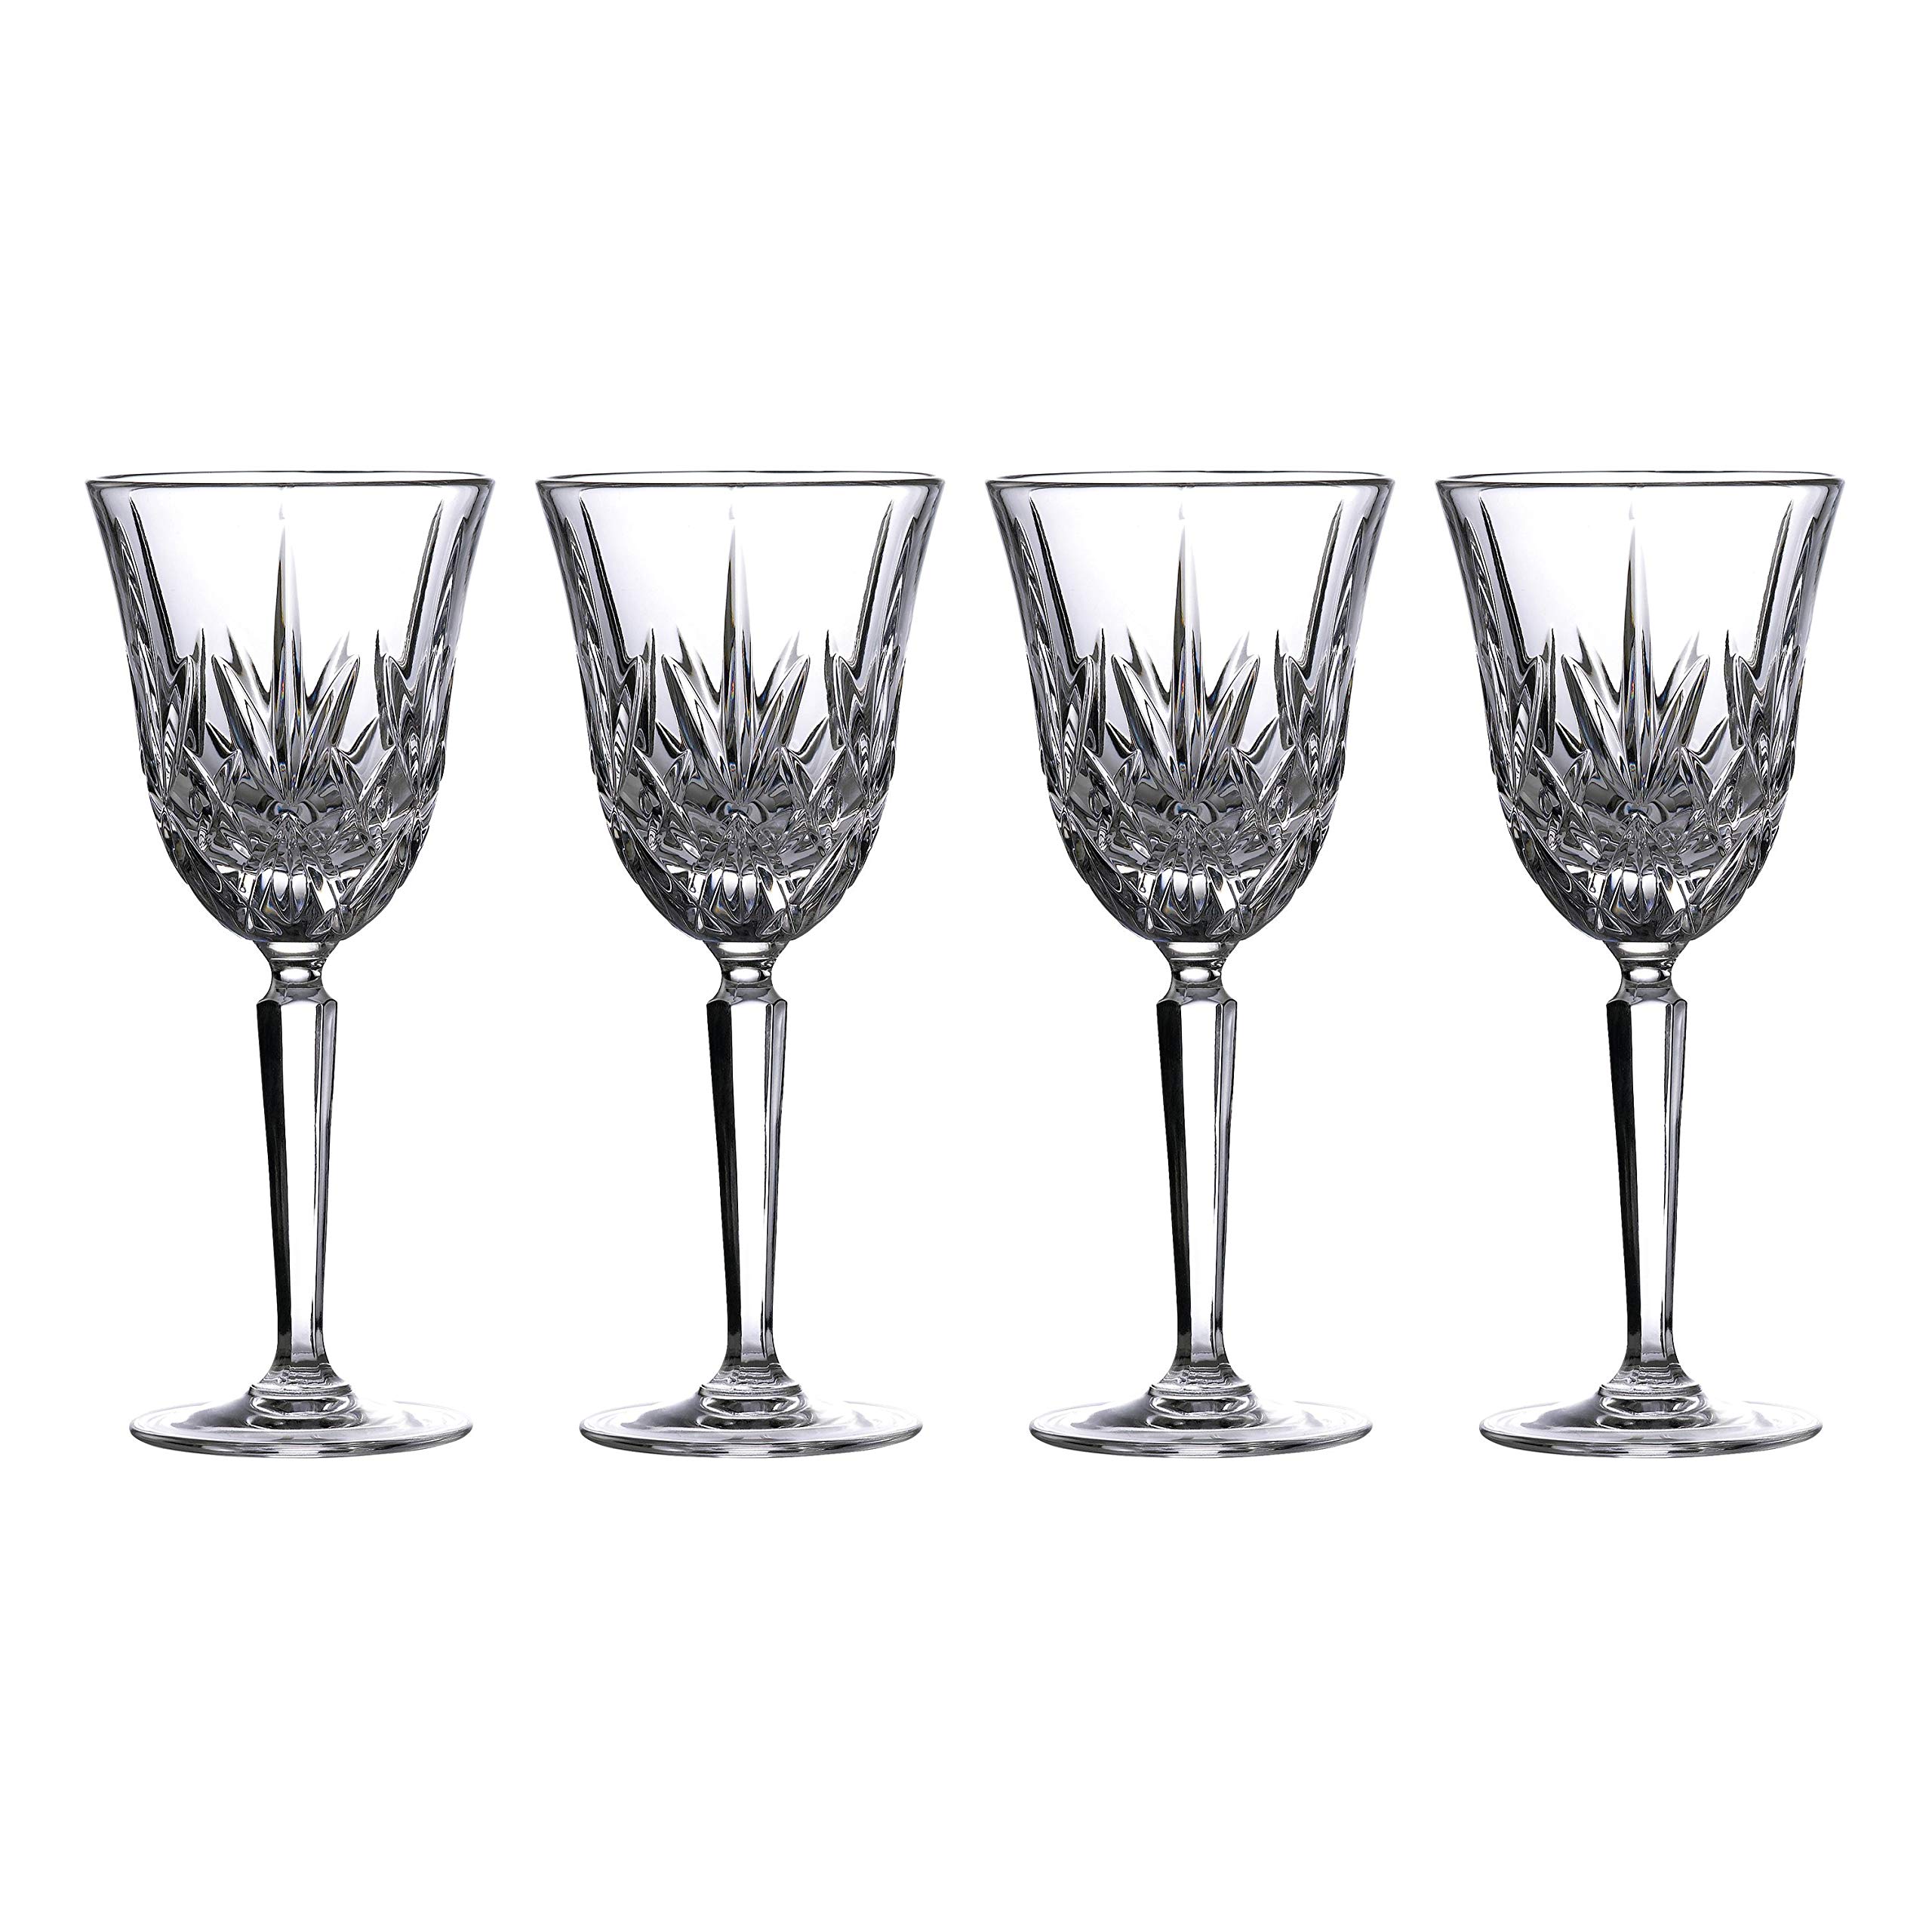 Marquis by Waterford Maxwell White Wine, set of 4